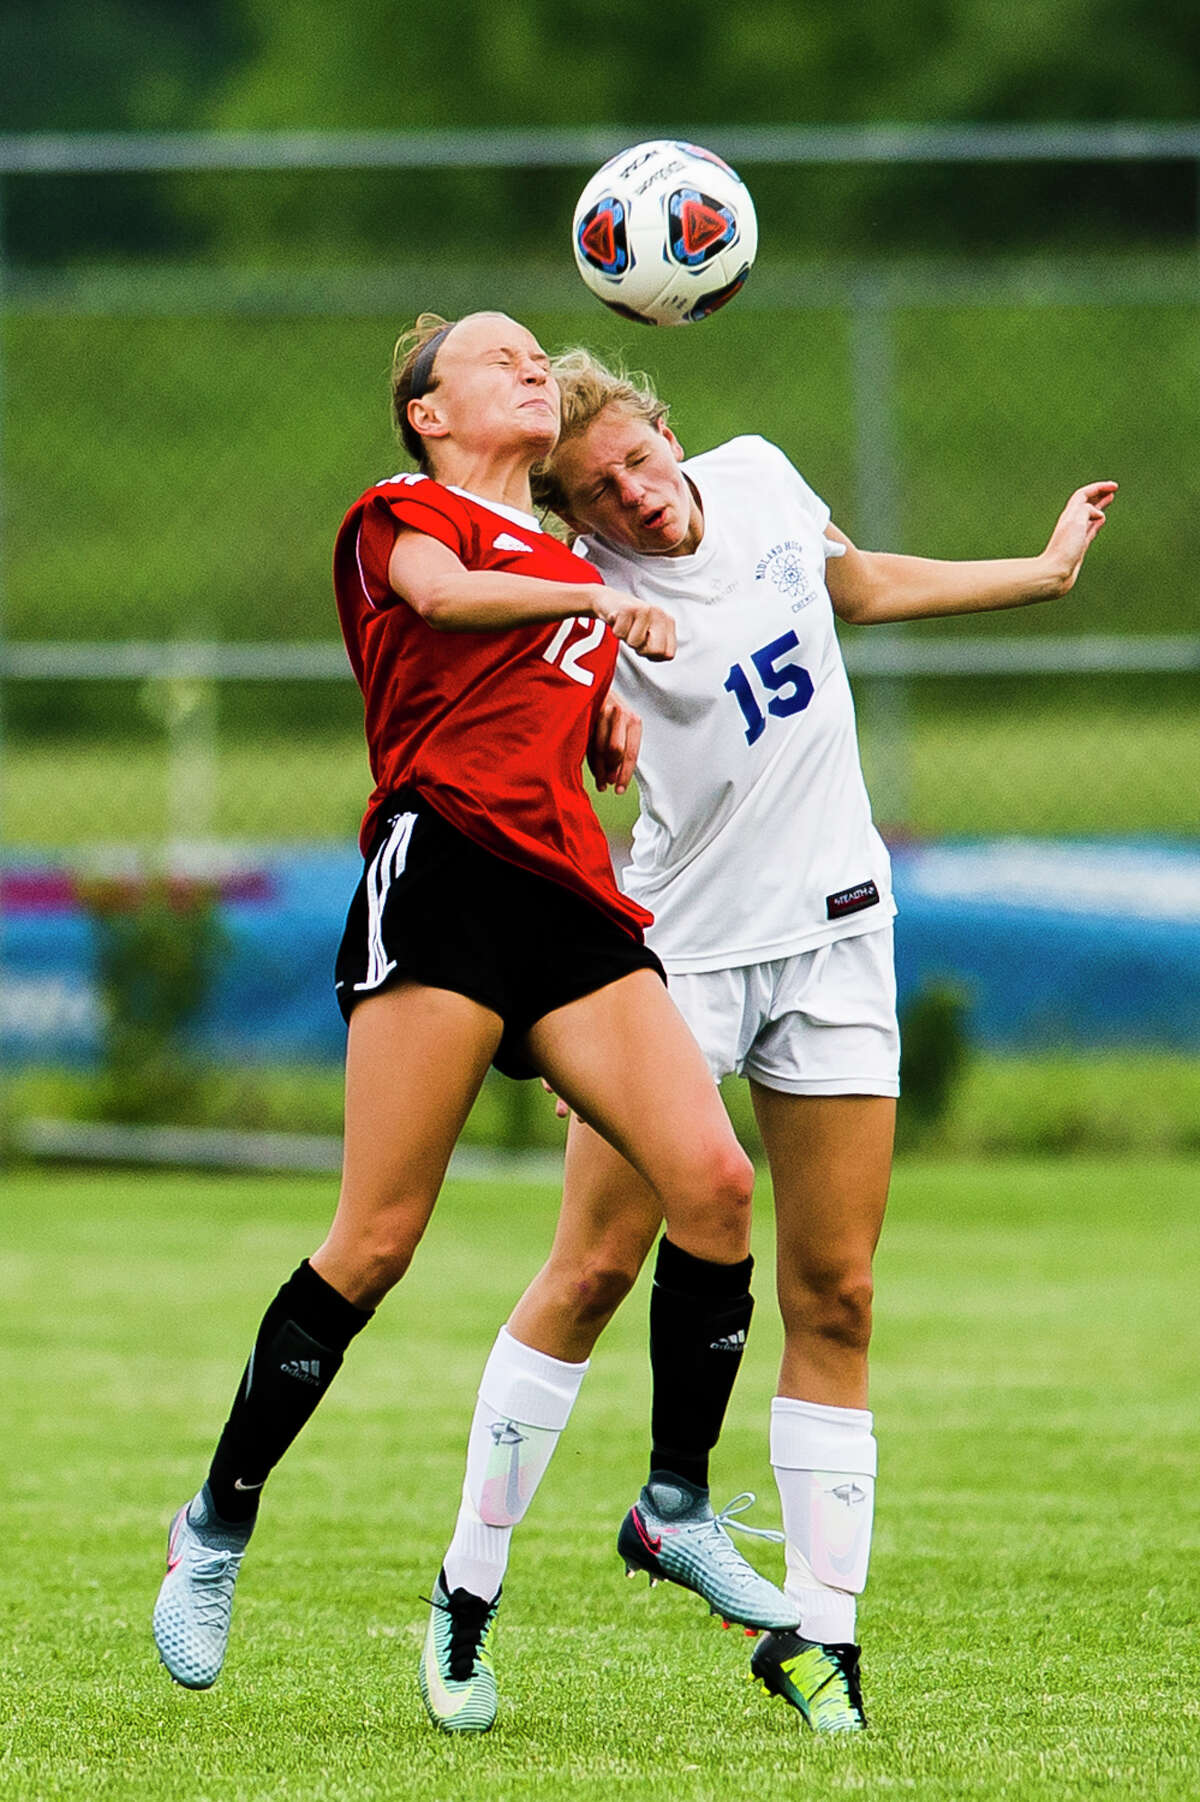 Midland junior Samantha Vansumeren jumps up for a header during the Chemics' 1-0 Division 1 semifinal loss to Grand Blanc on Tuesday, June 12, 2018 at Holt High School. (Katy Kildee/kkildee@mdn.net)